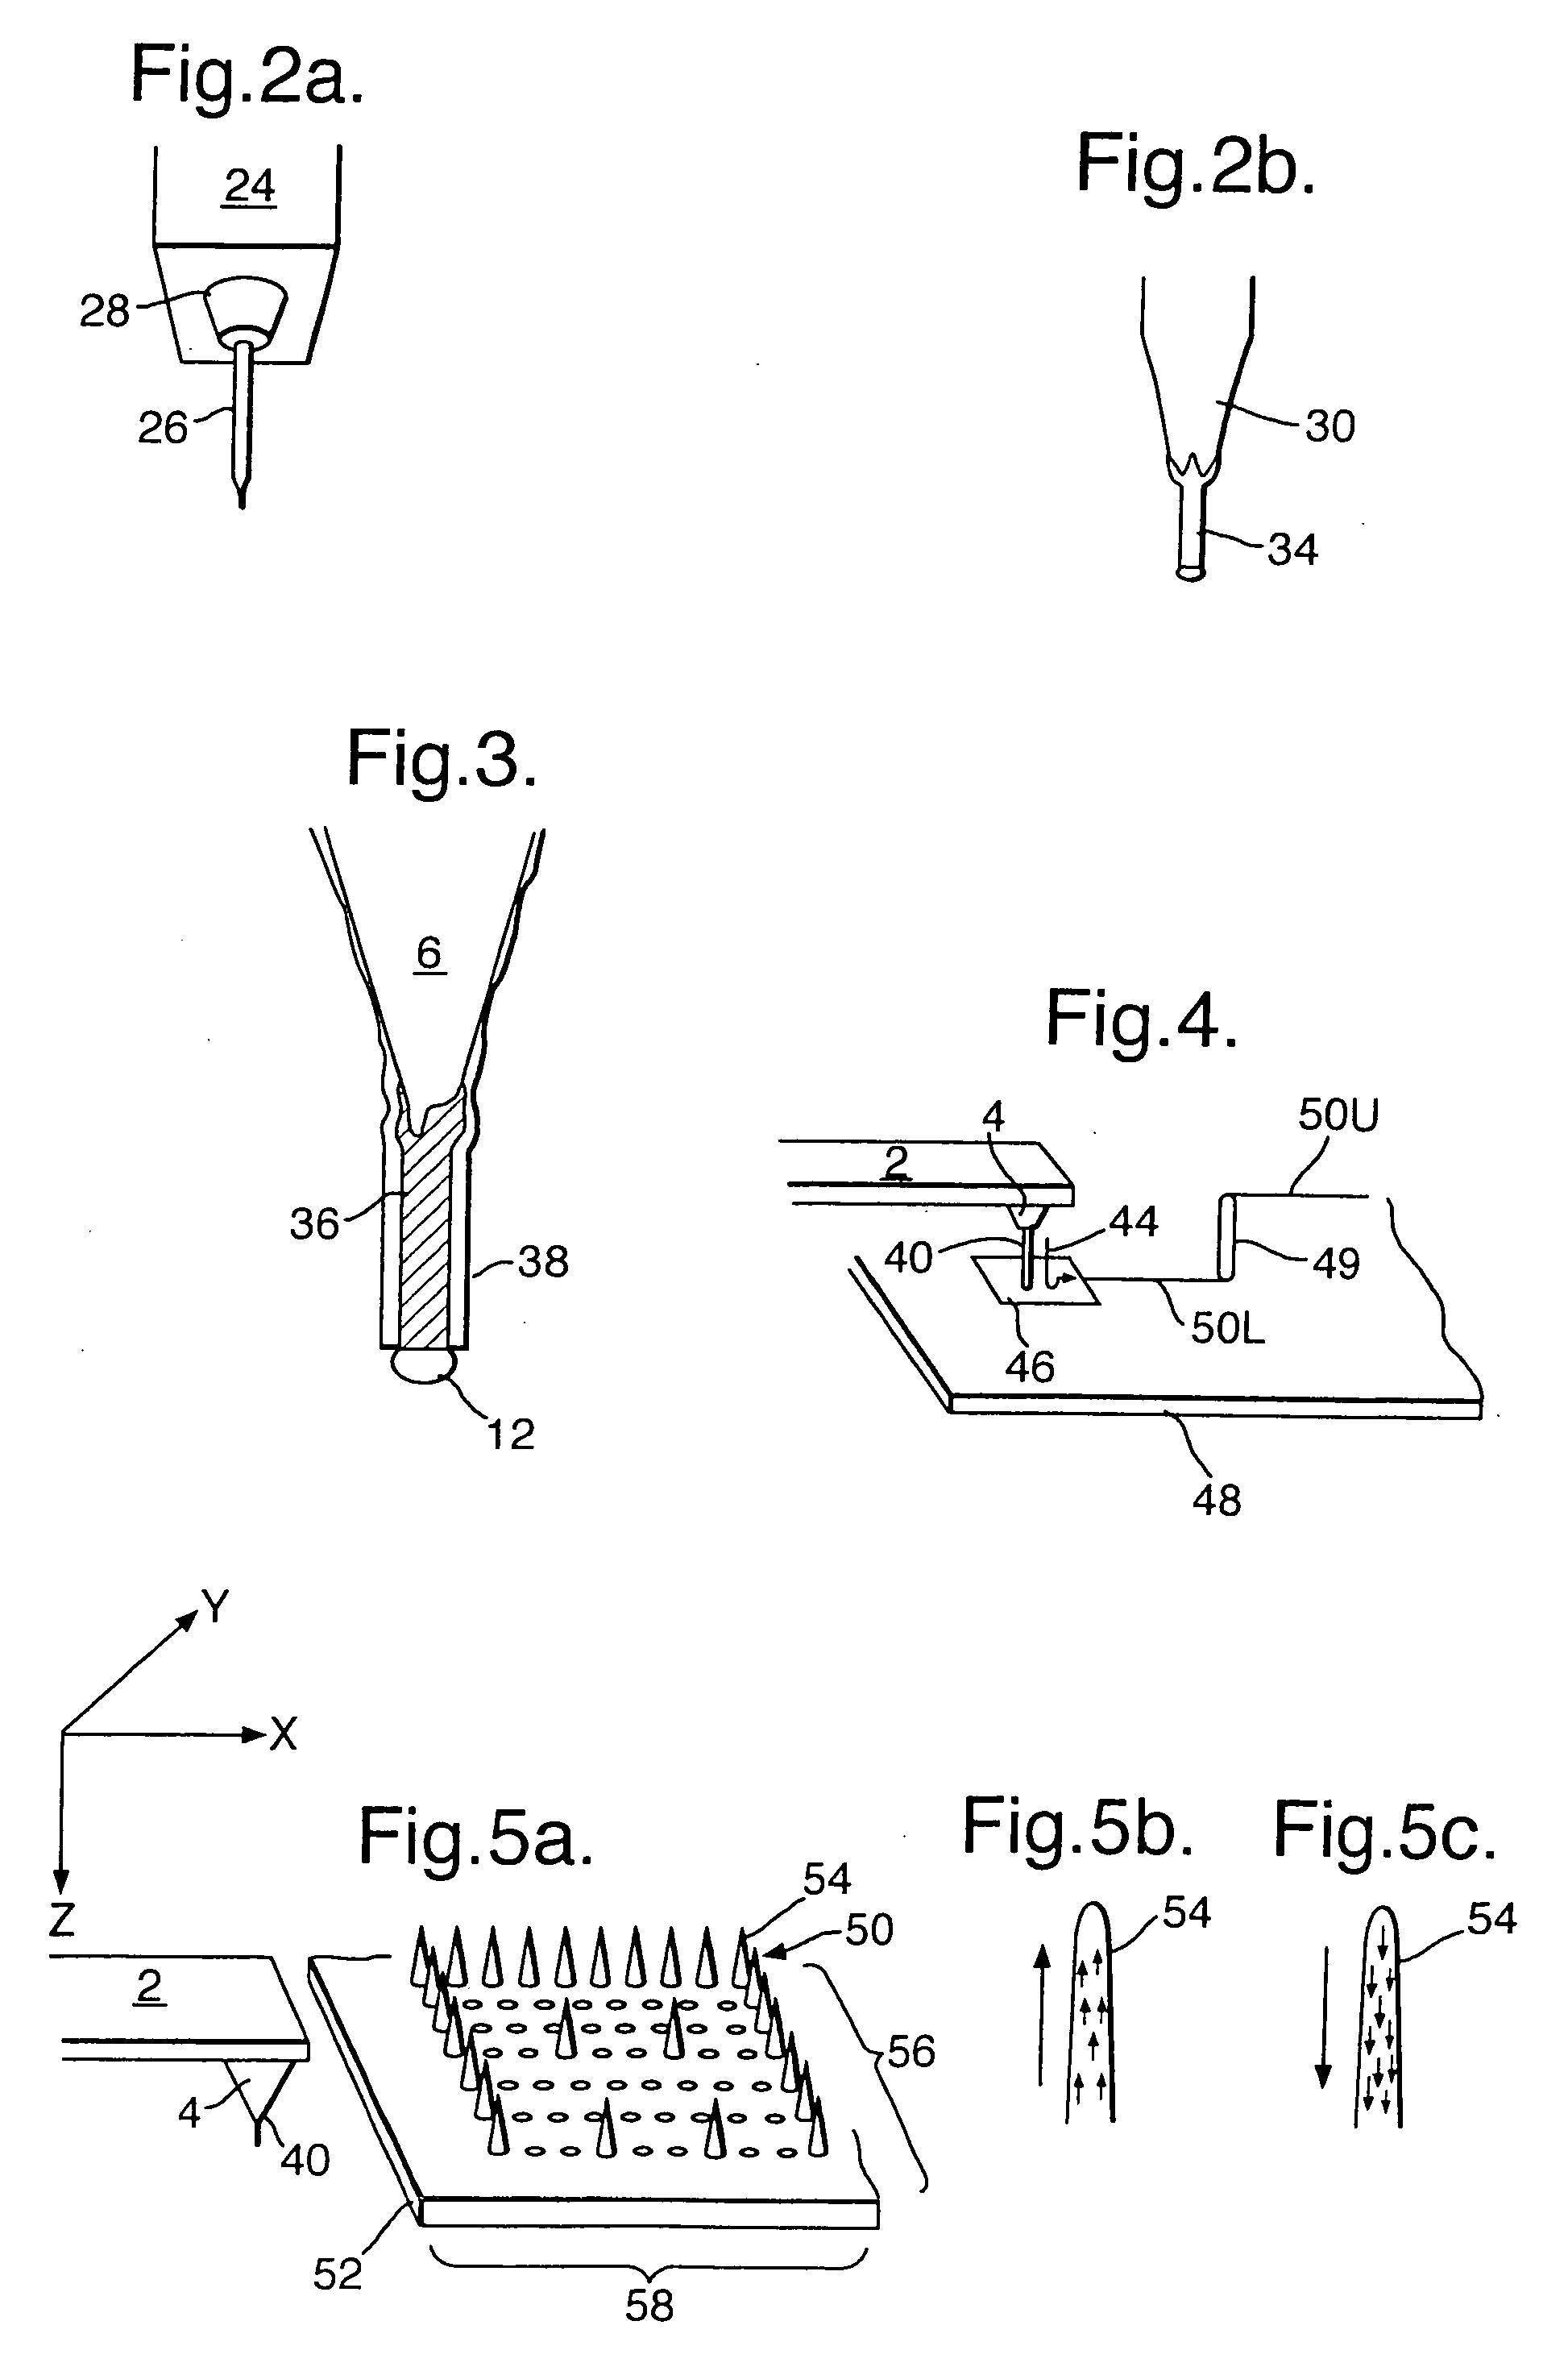 Probe structures incorporating nanowhiskers, production methods thereof and methods of forming nanowhiskers